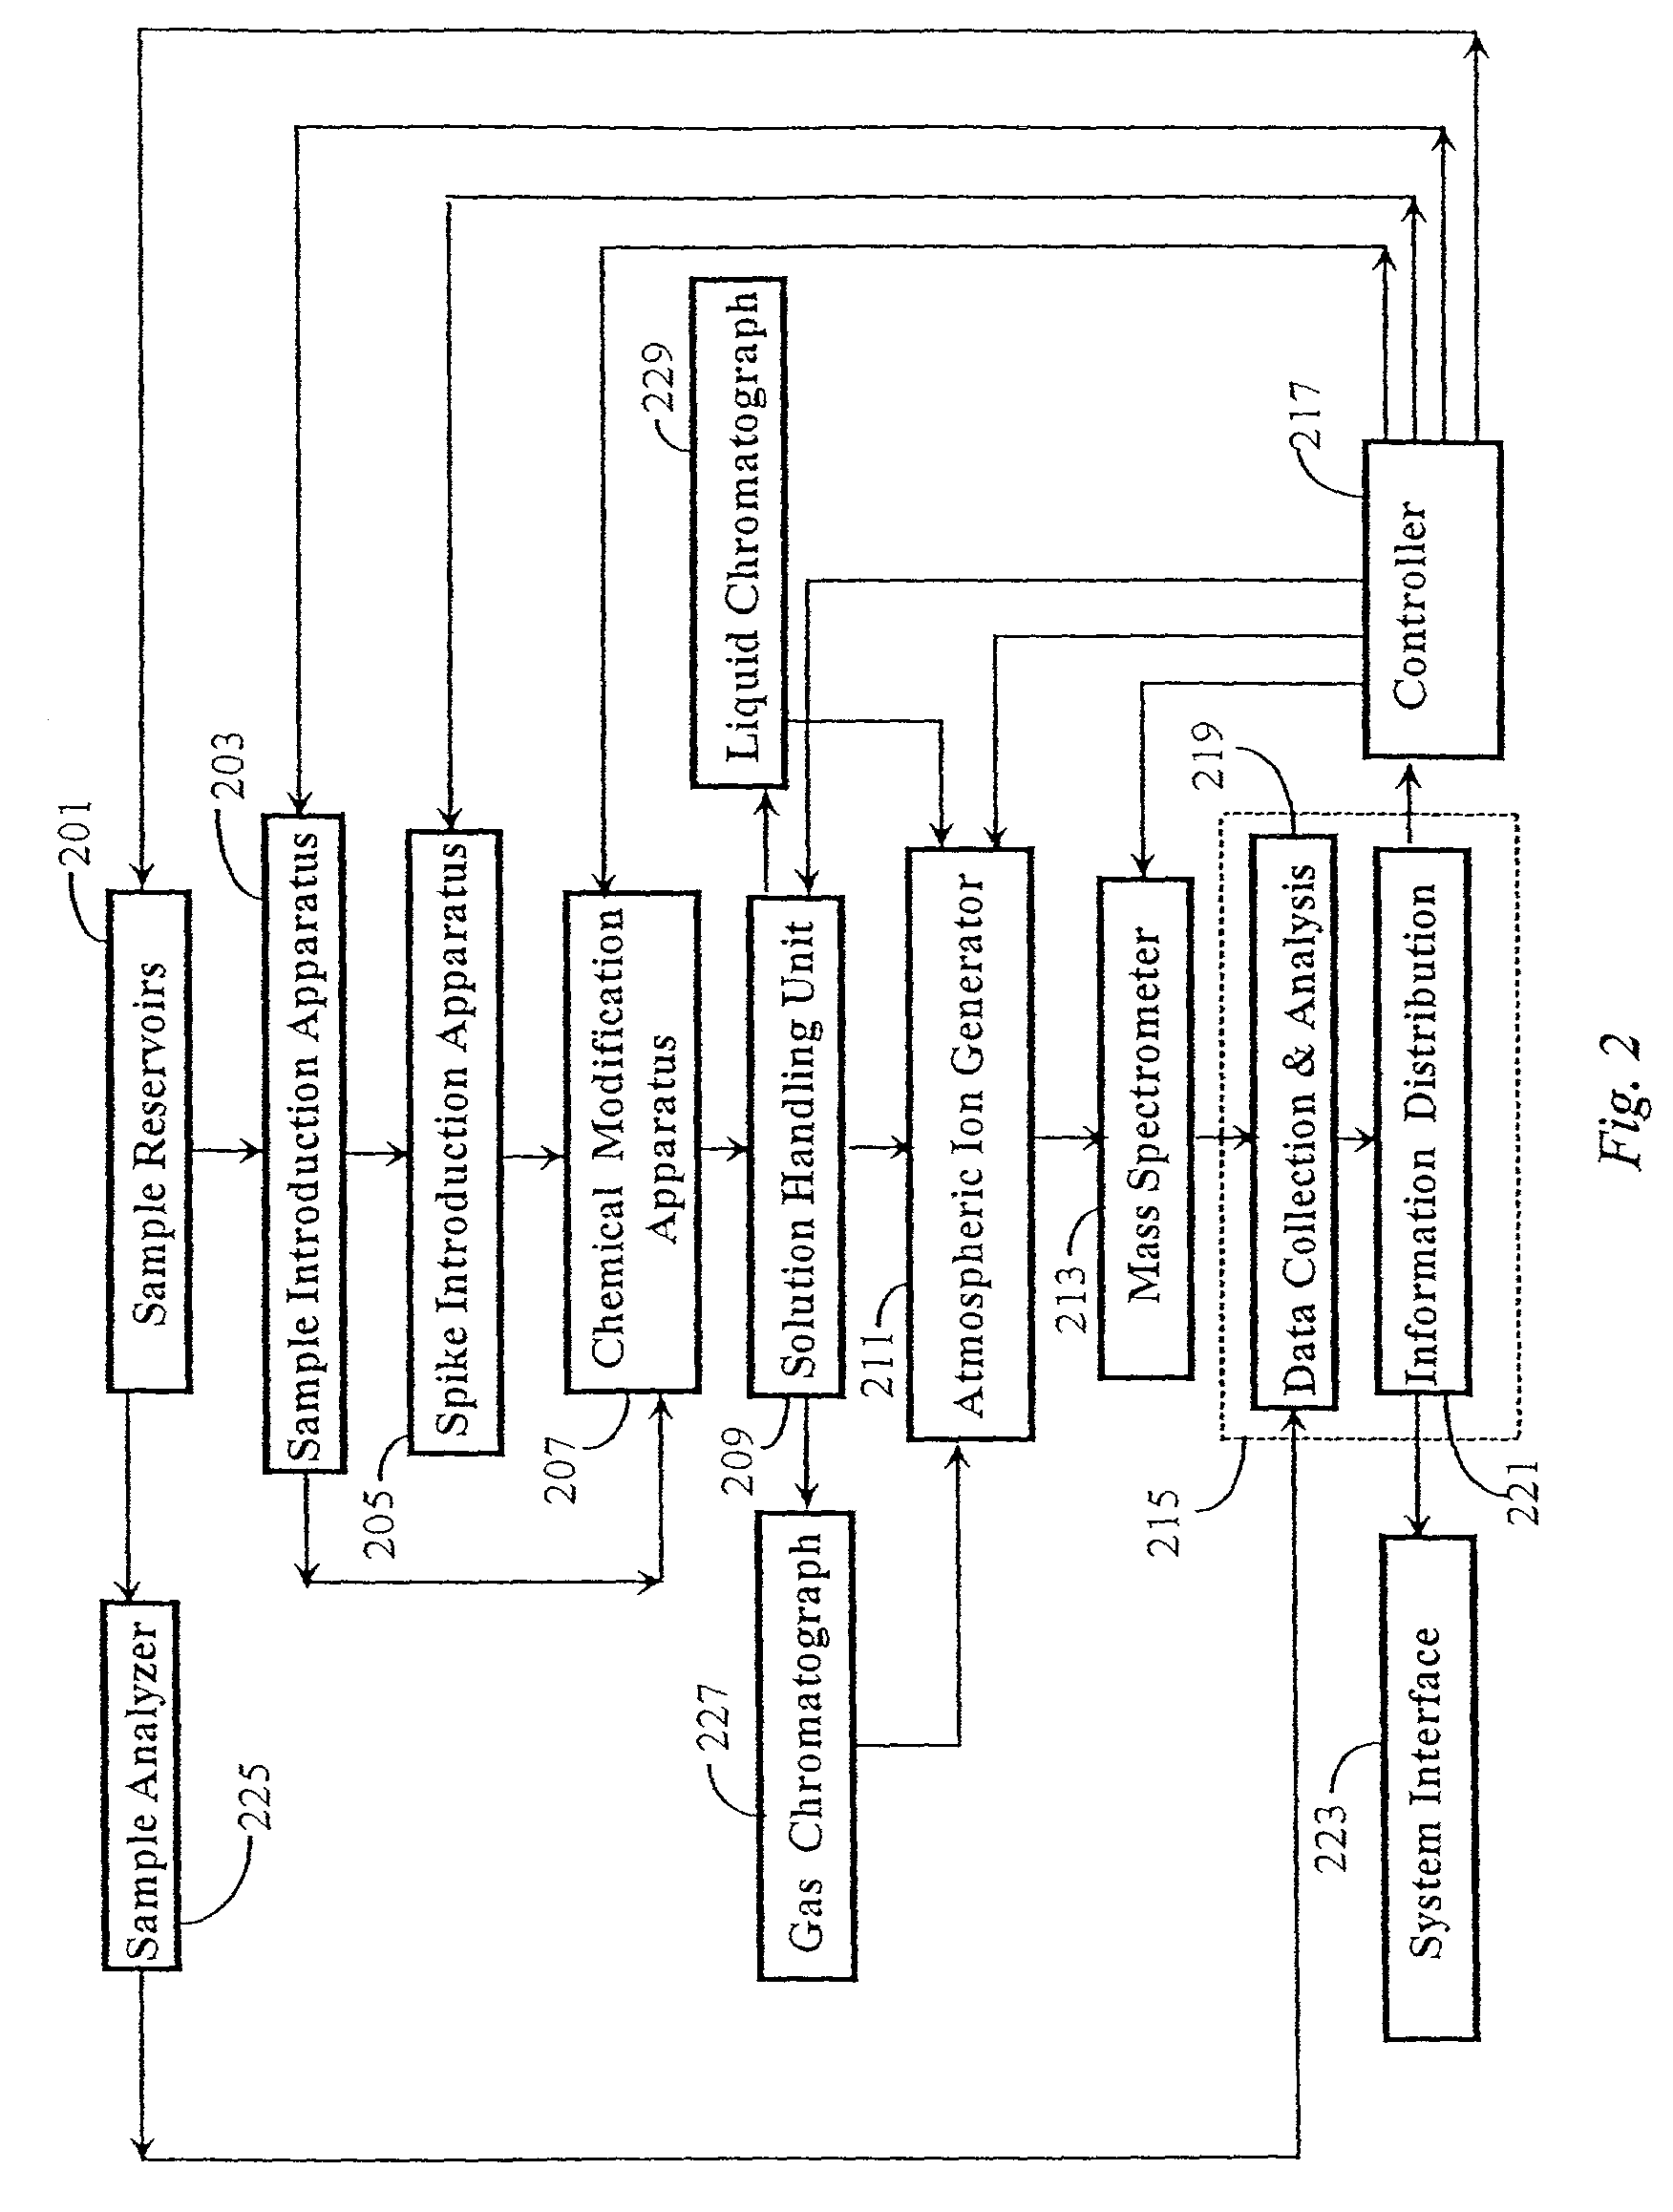 Method and instrument for automated analysis of fluid-based processing systems